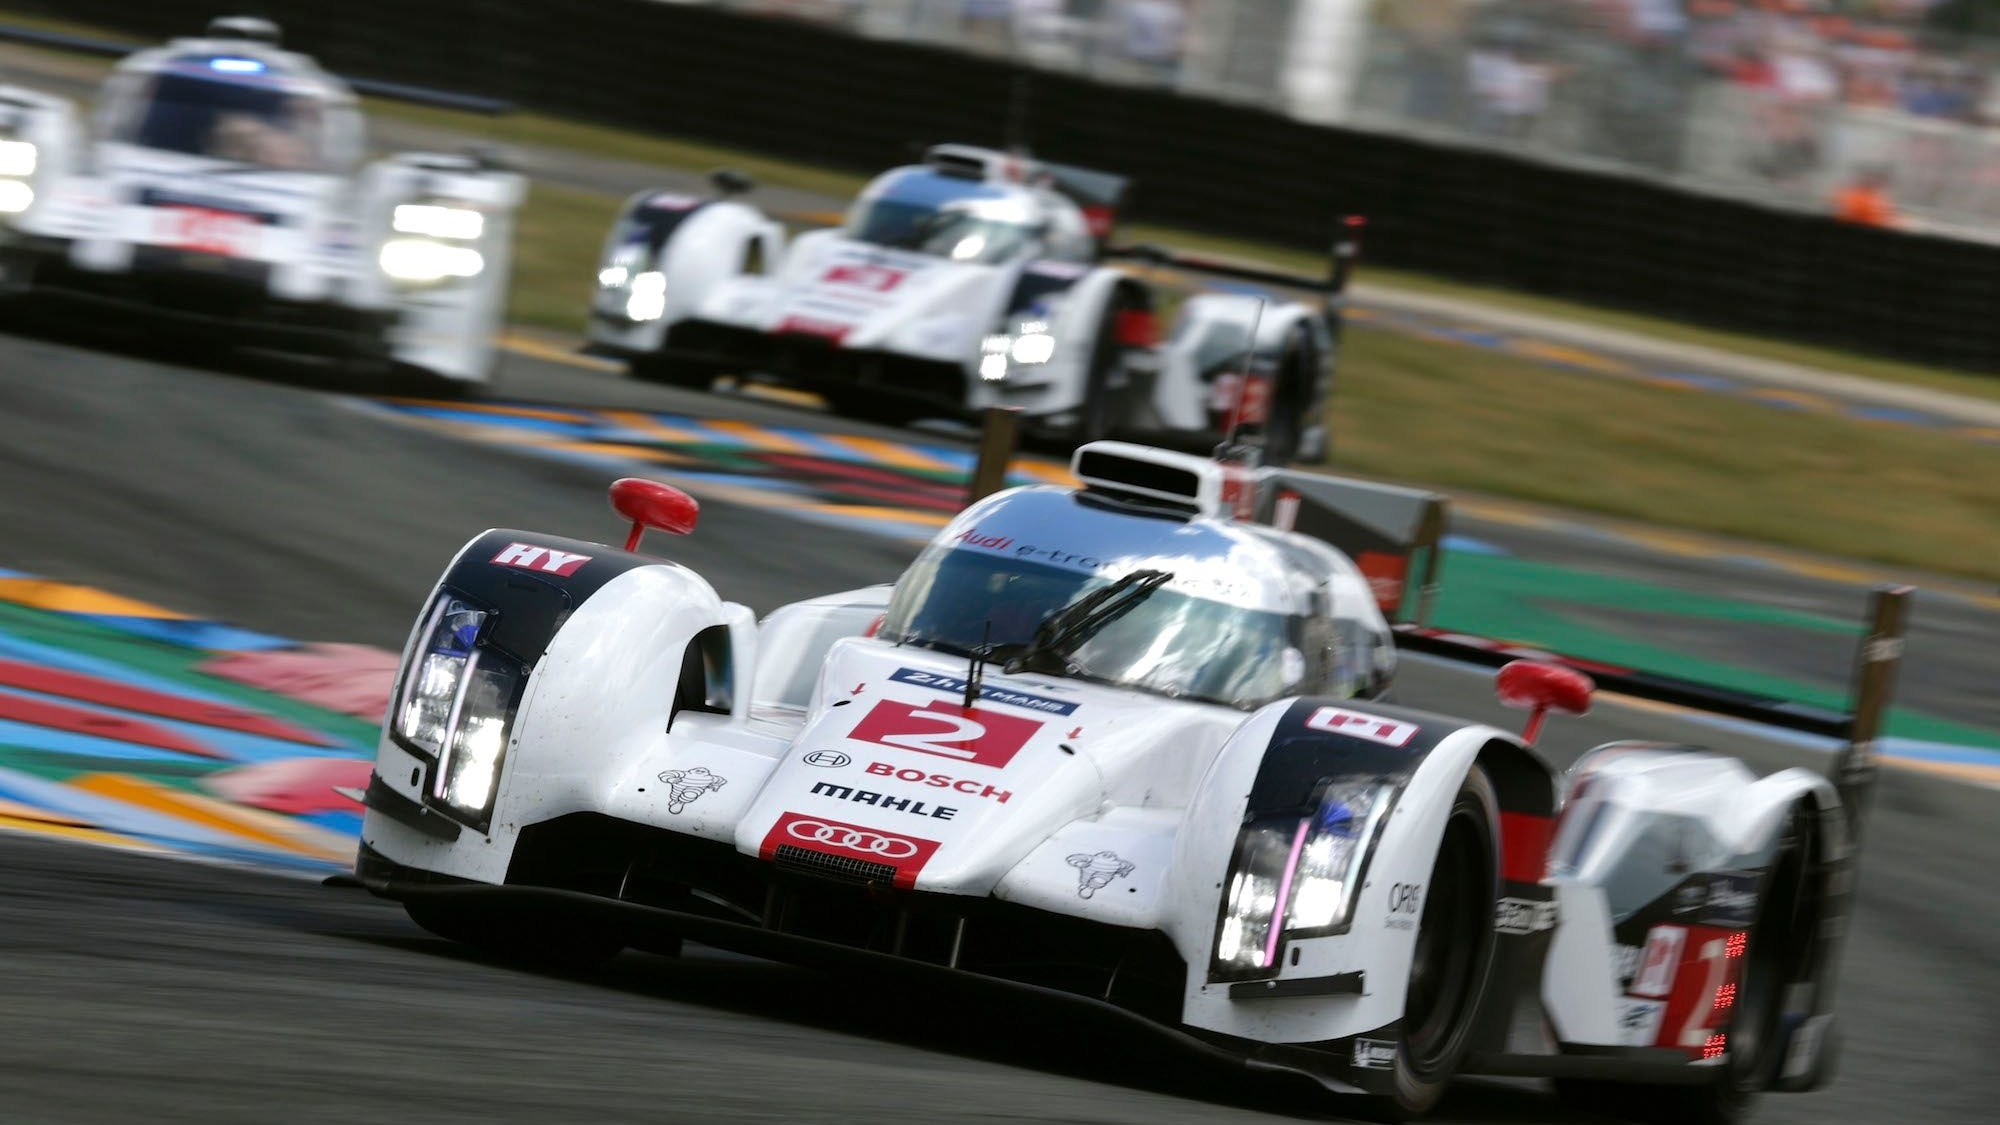 Audi celebrates its 13th Le Mans 24 Hours win in 2014